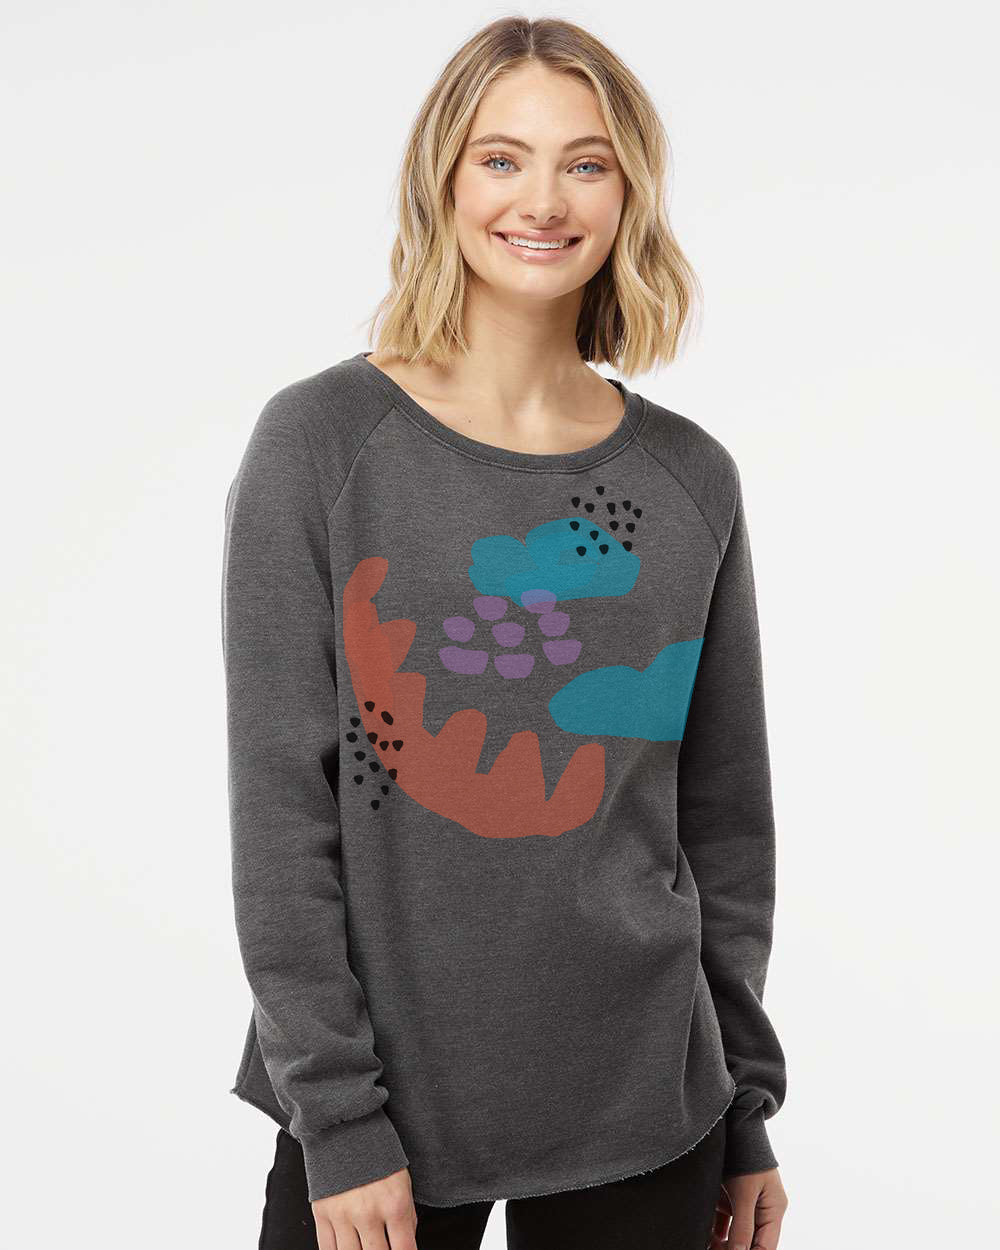 a woman wearing a grey sweater with colorful flowers on it